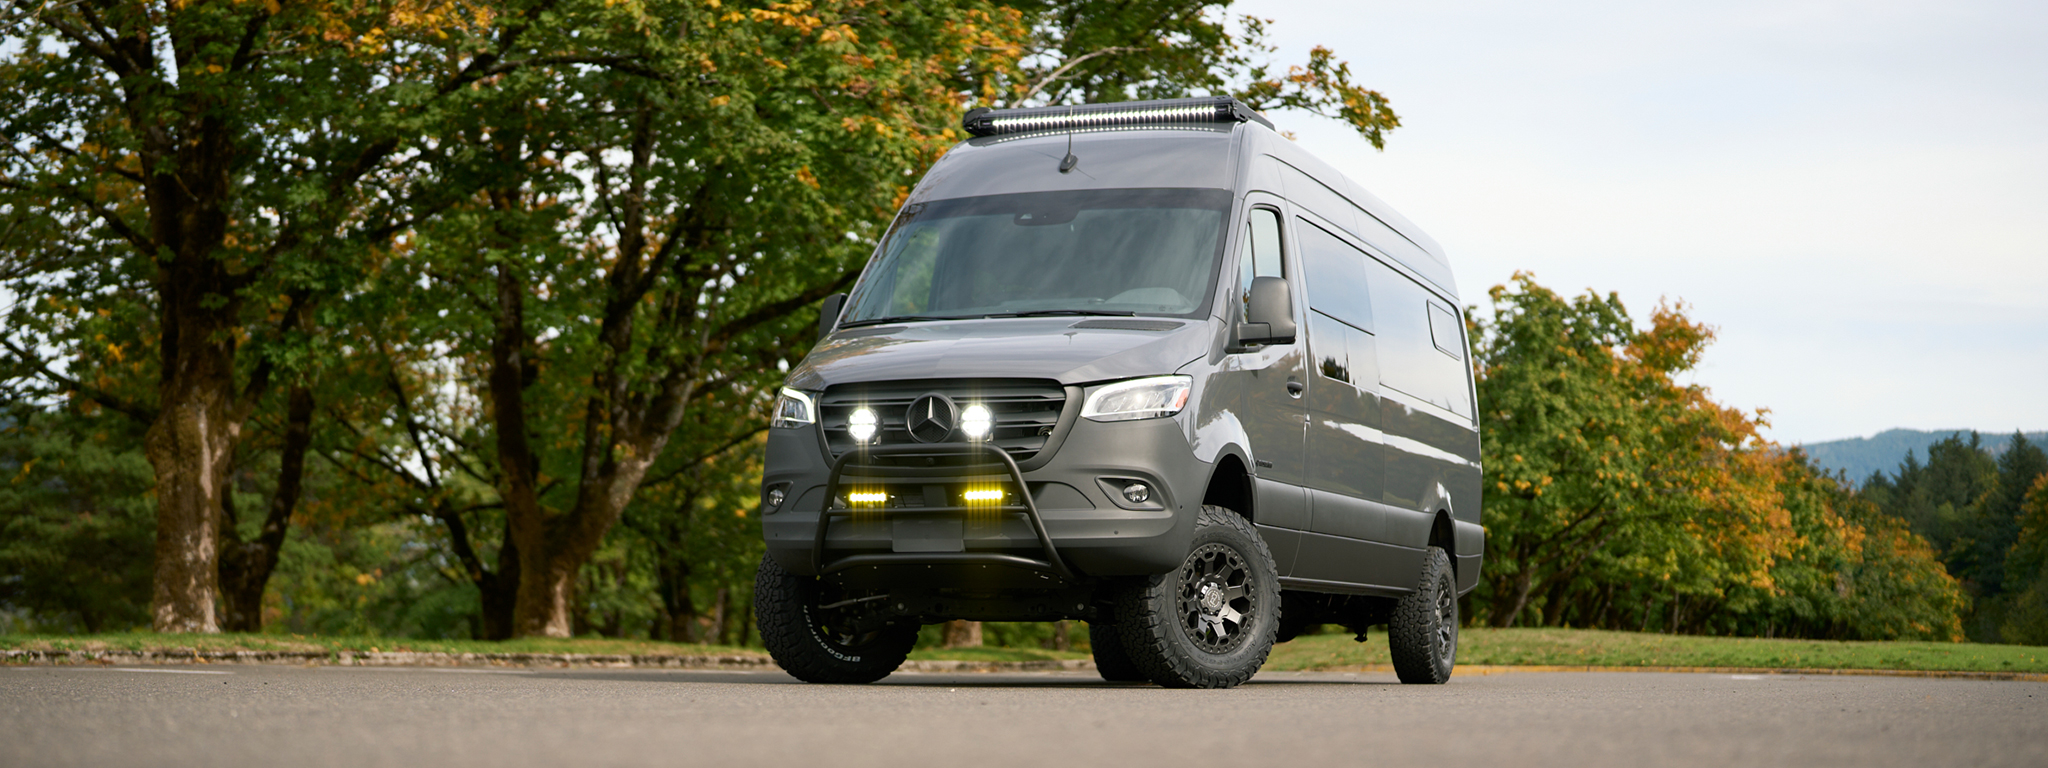 How I Built a Pro-Level Sprinter Camper Van in My Driveway - Outside Online